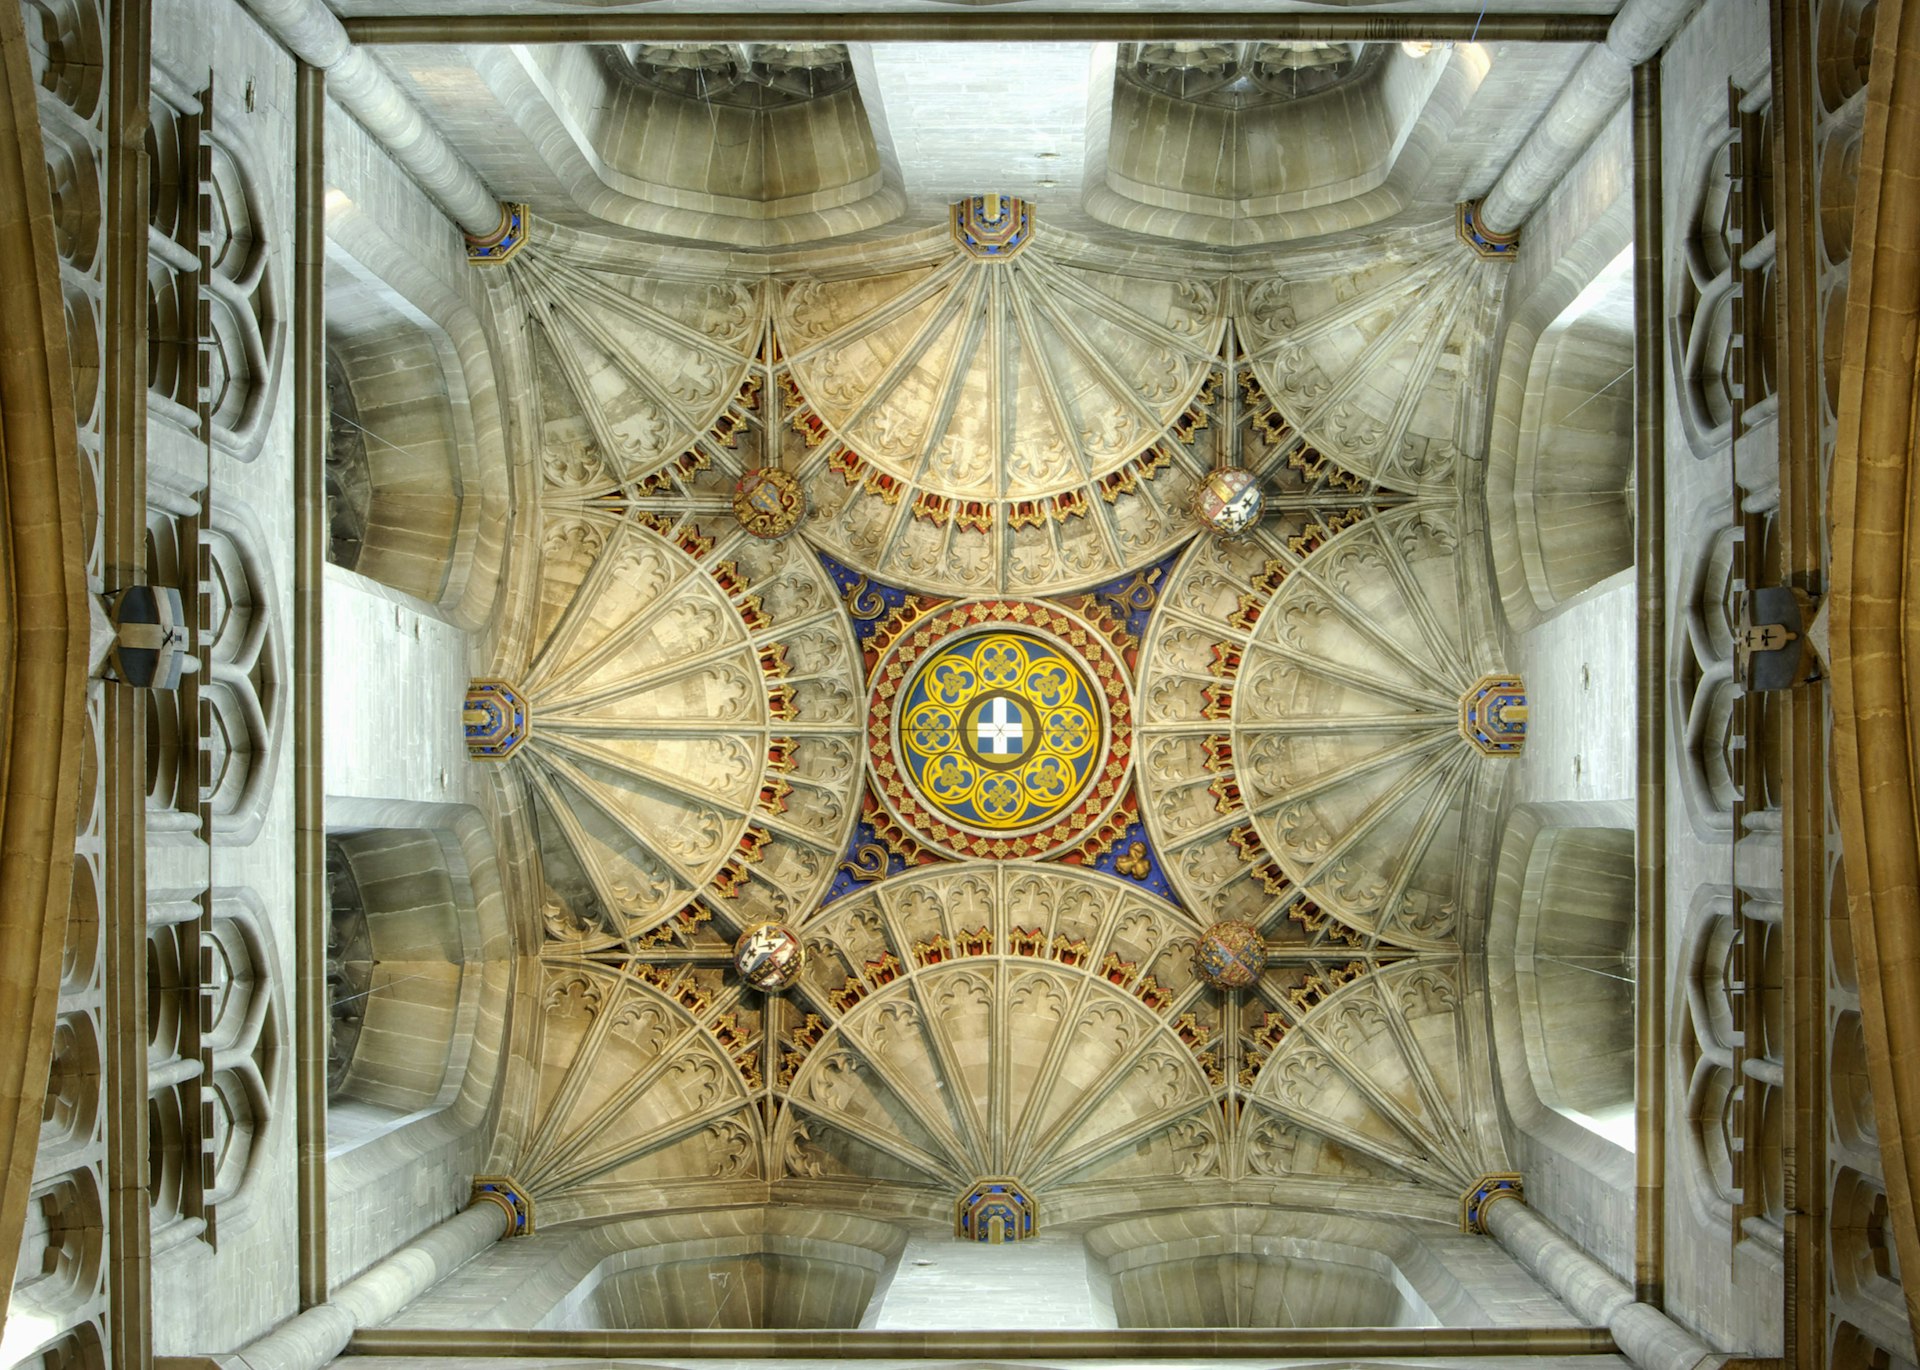 The arches of Canterbury Cathedral's magnificent ceiling with a gold and blue crest in the center